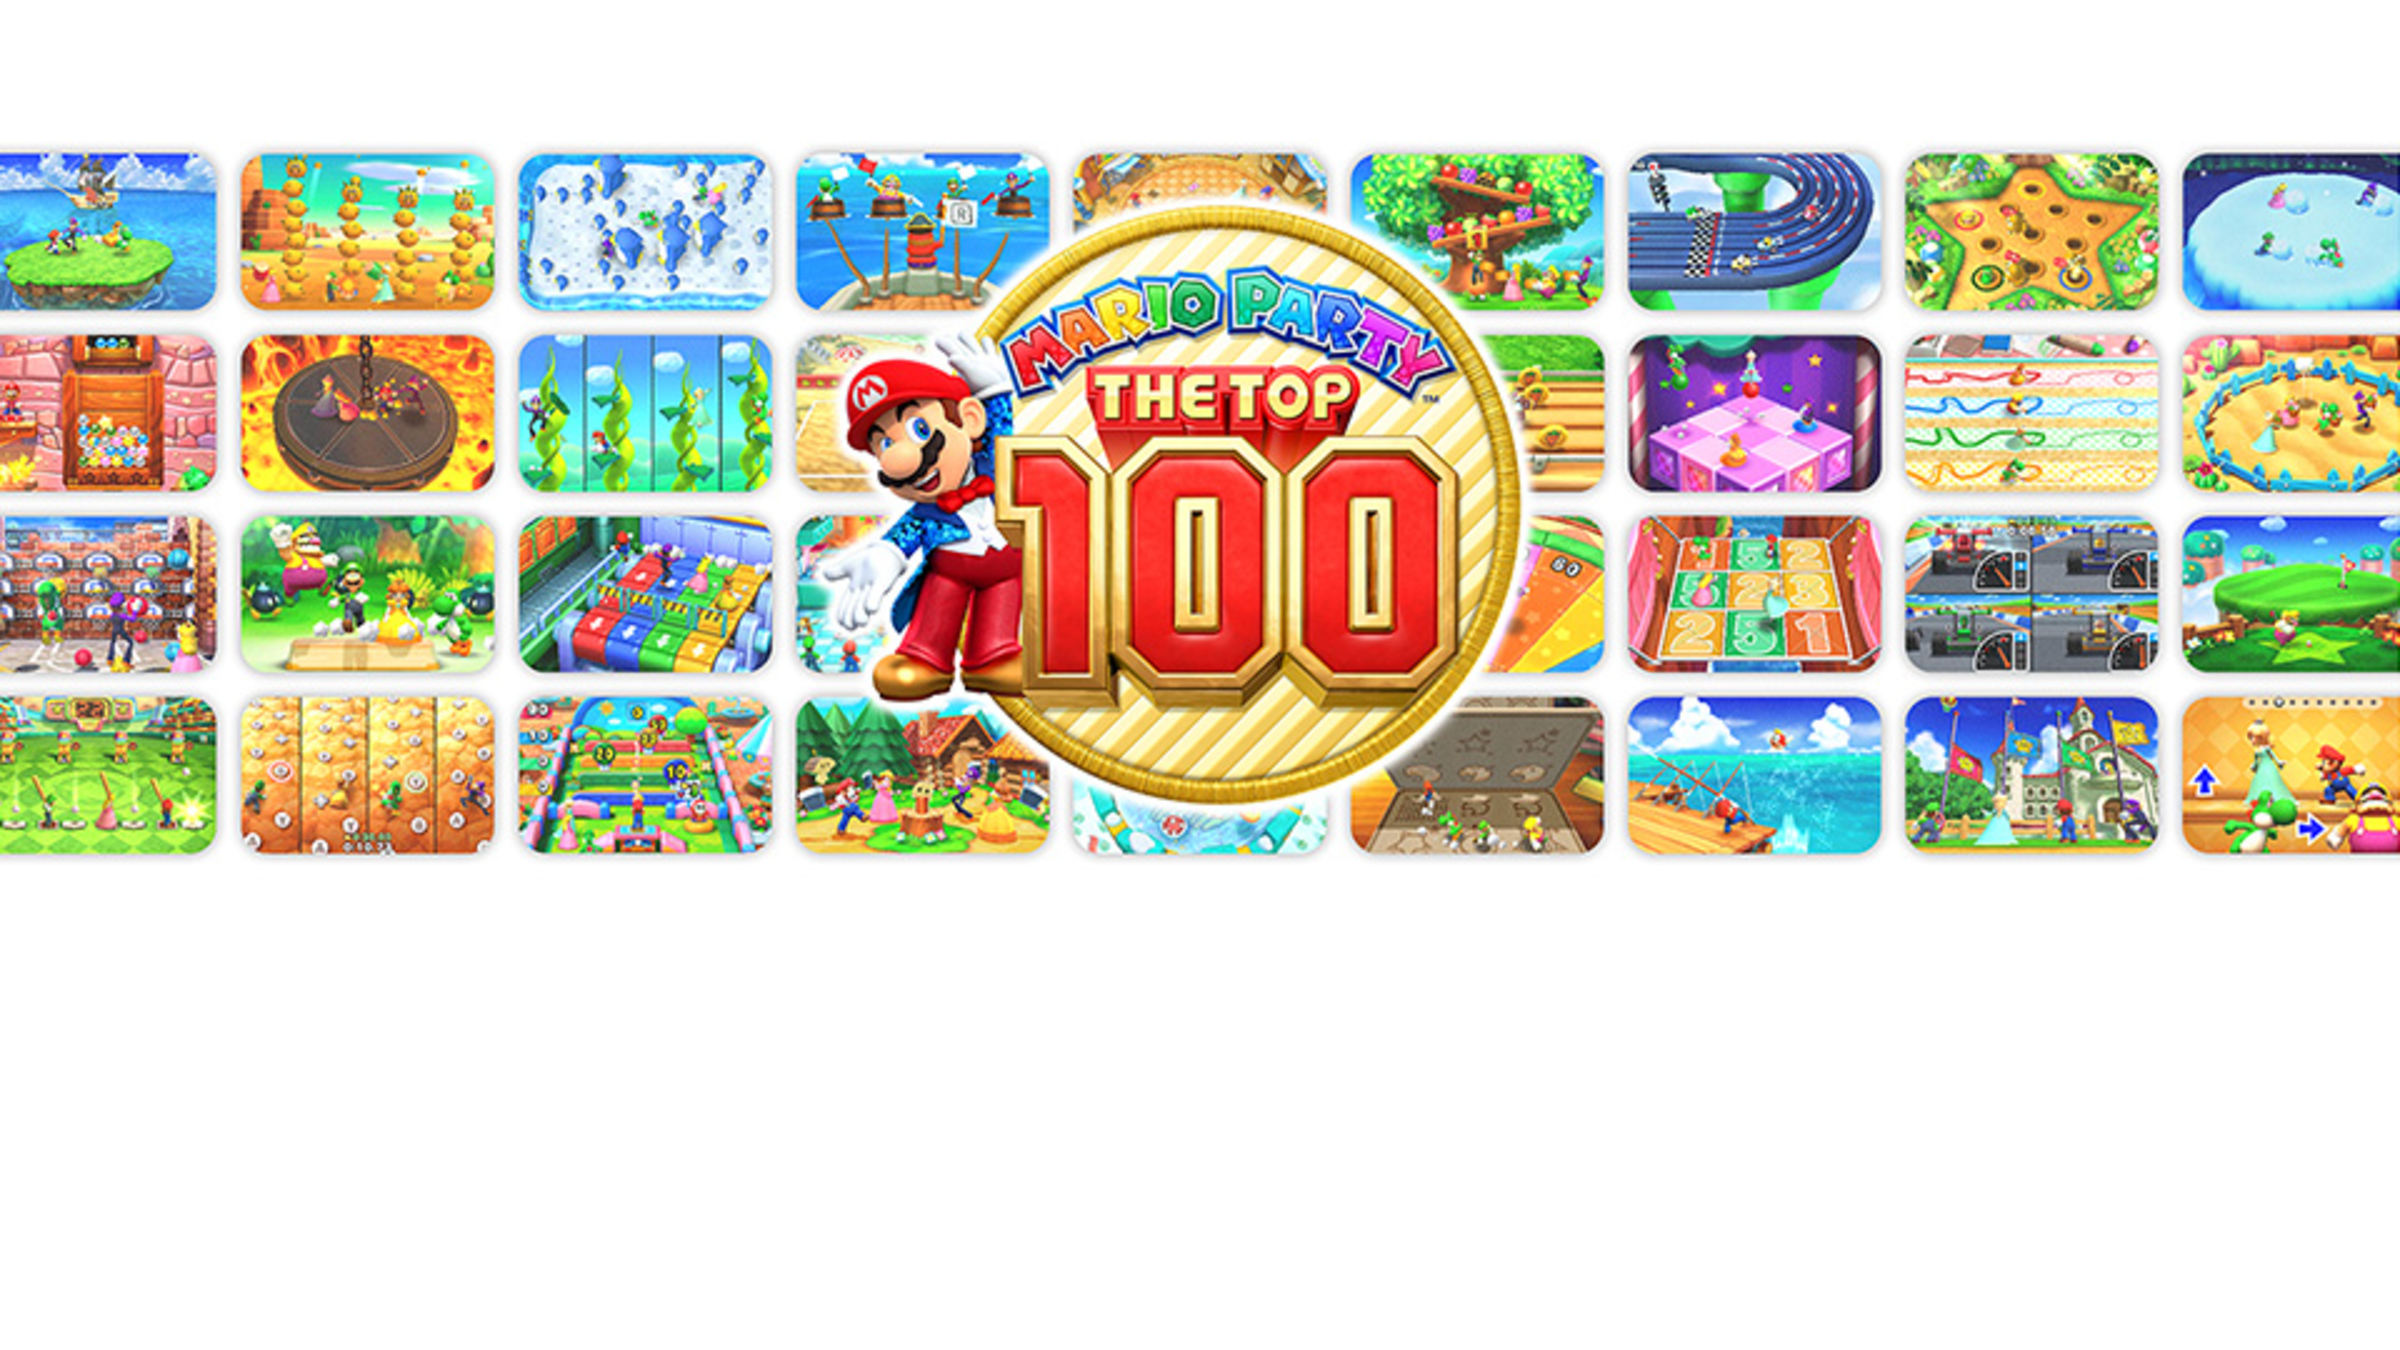 Mario Party: The Top 100 for 3DS Site